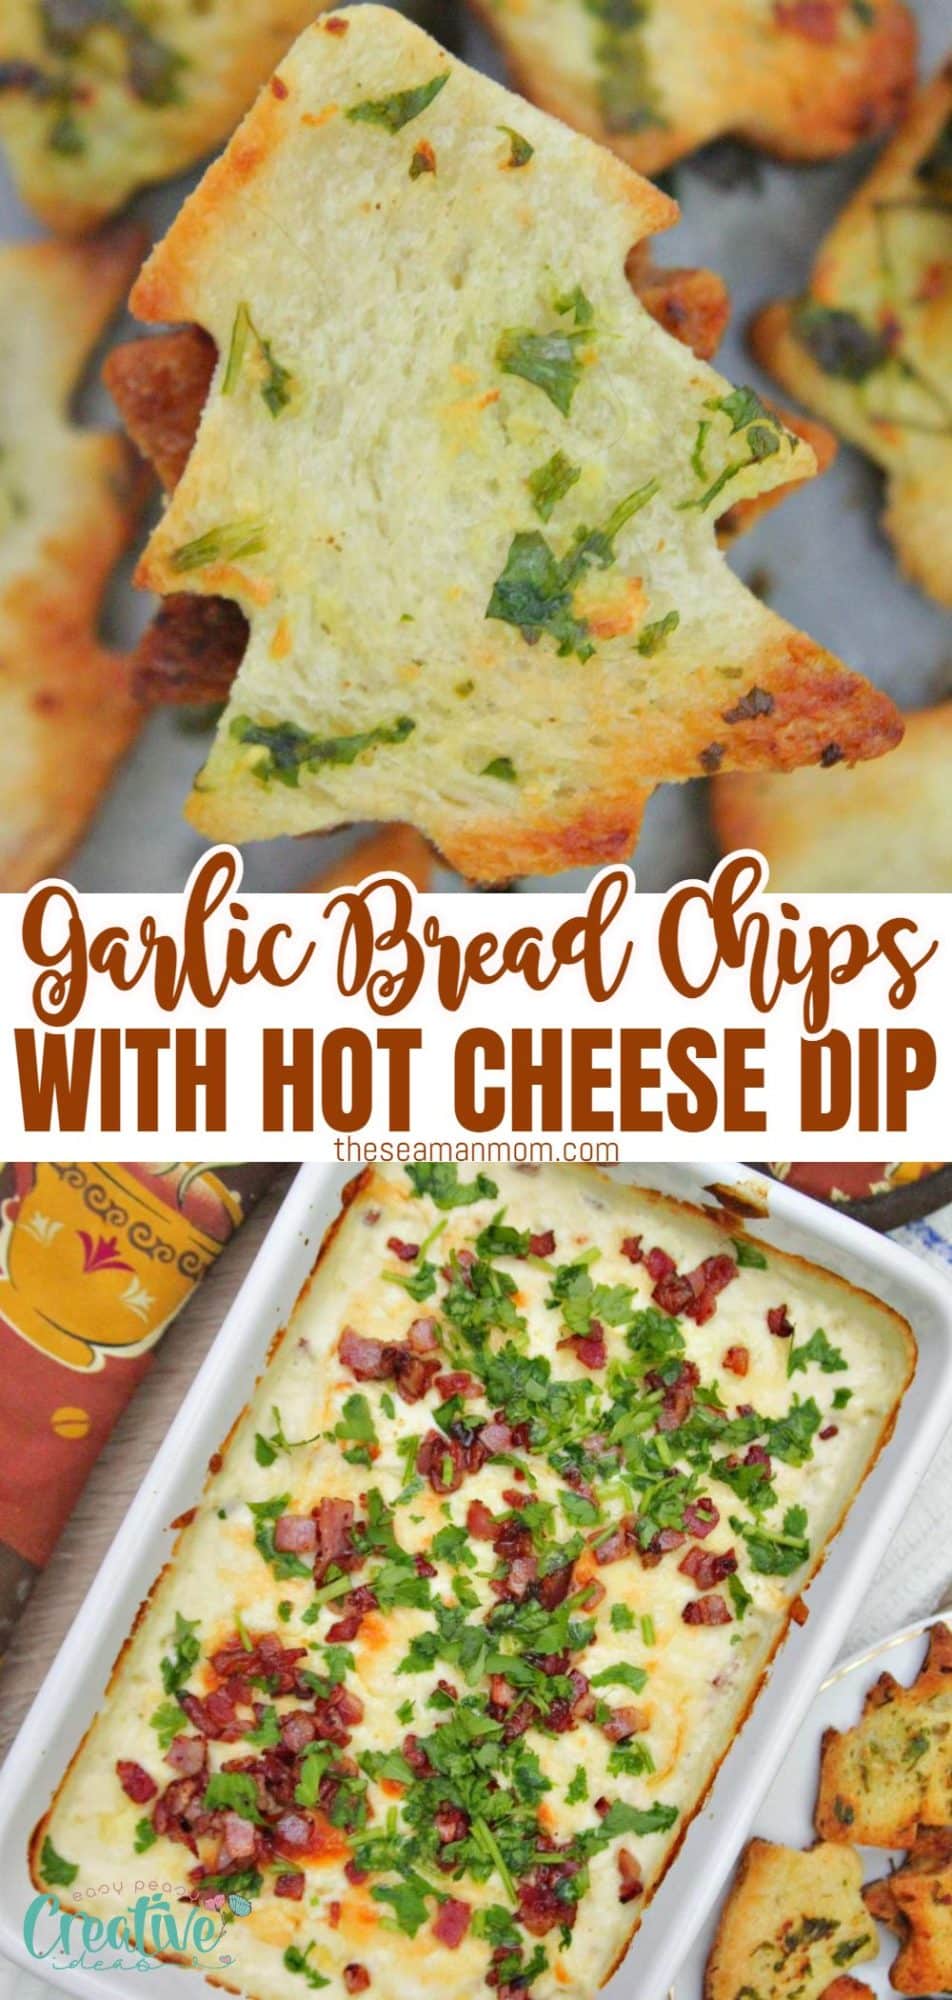 Garlic bread chips with hot cheese dip